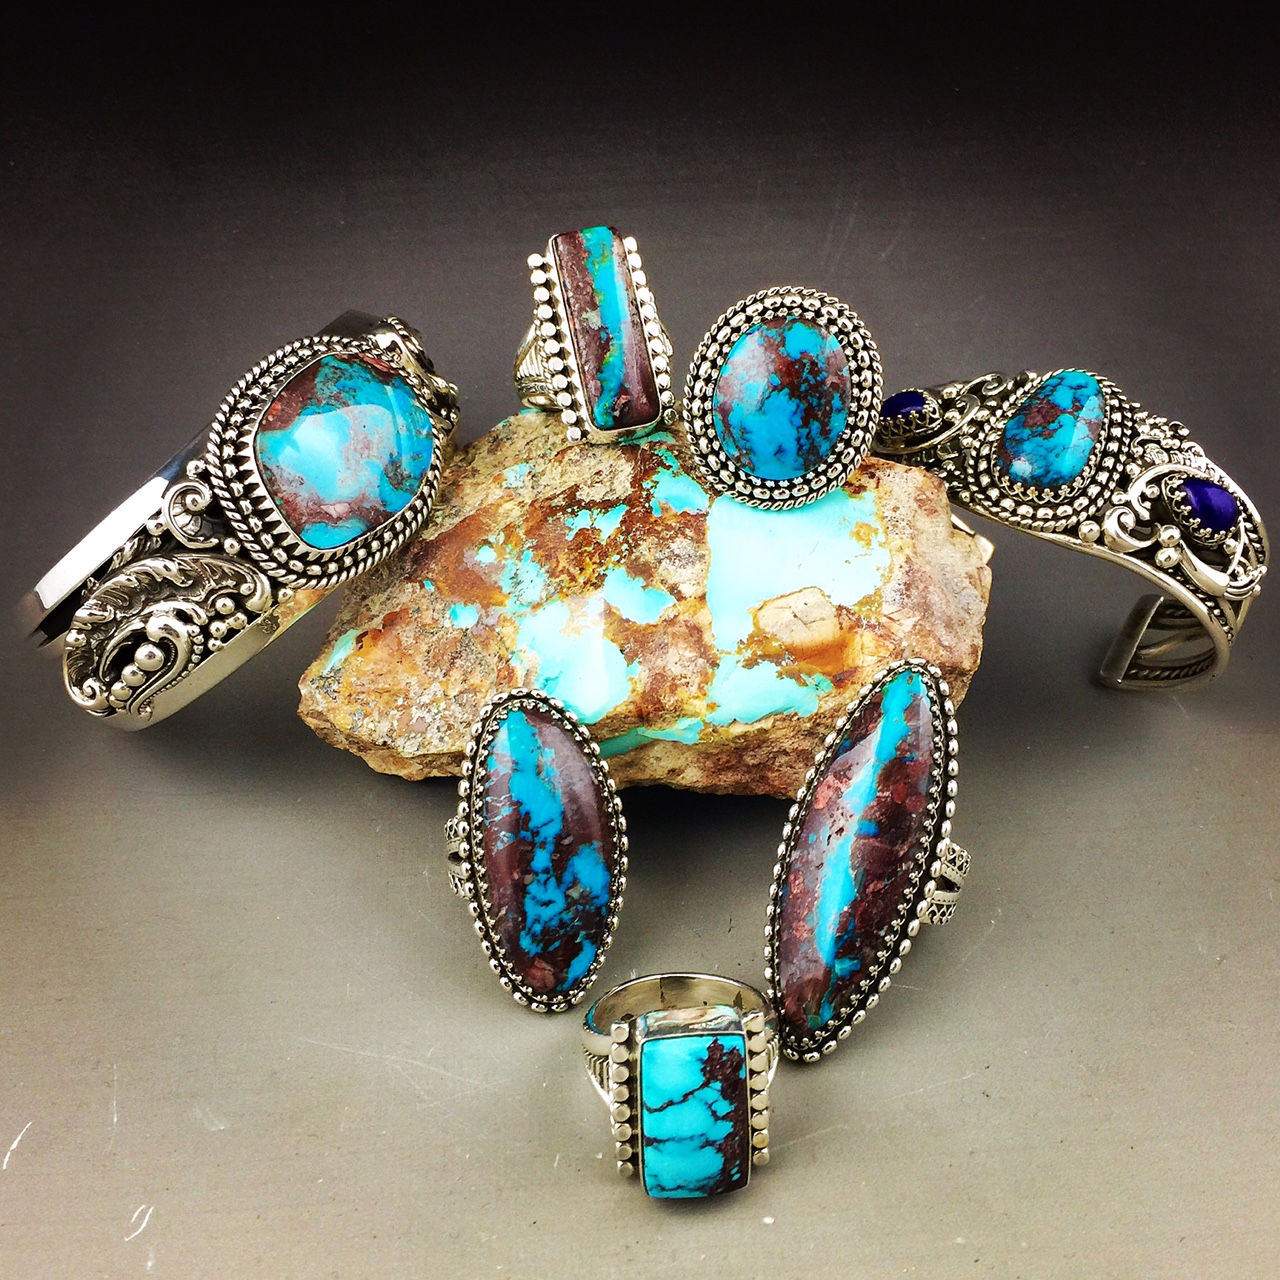 American Turquoise Jewelry